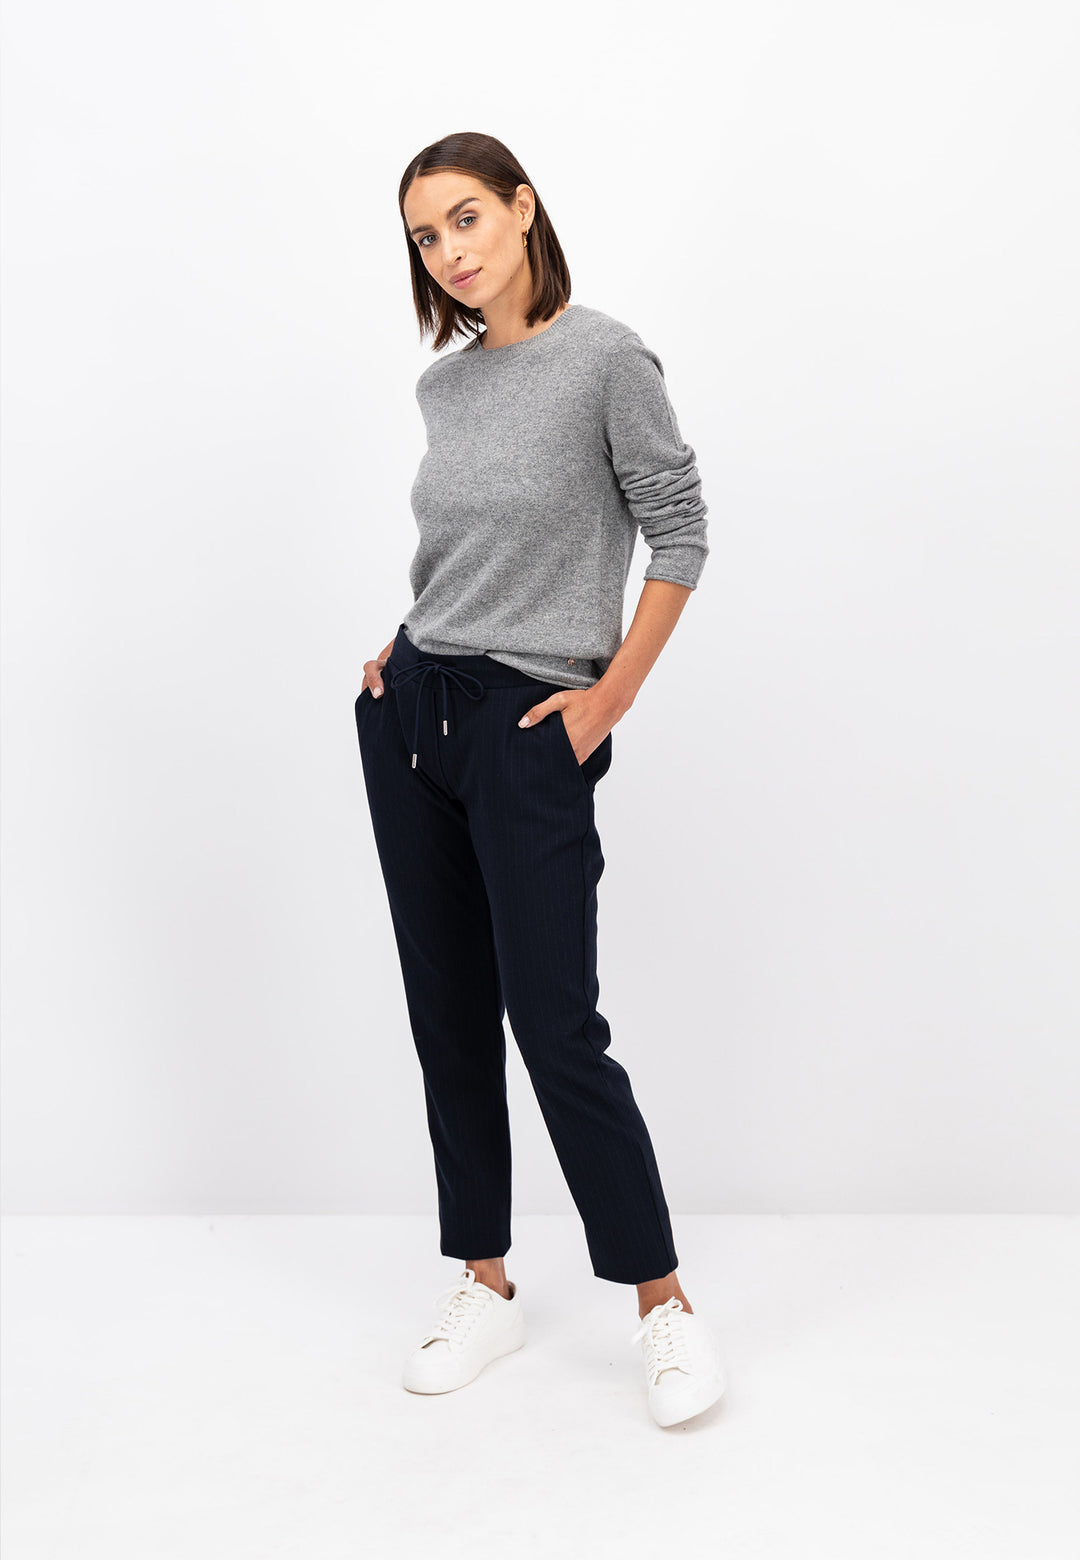 Ladies pants & skirts | Online Official Offizieller Shop | Fynch-Hatton Online Shop FYNCH-HATTON –